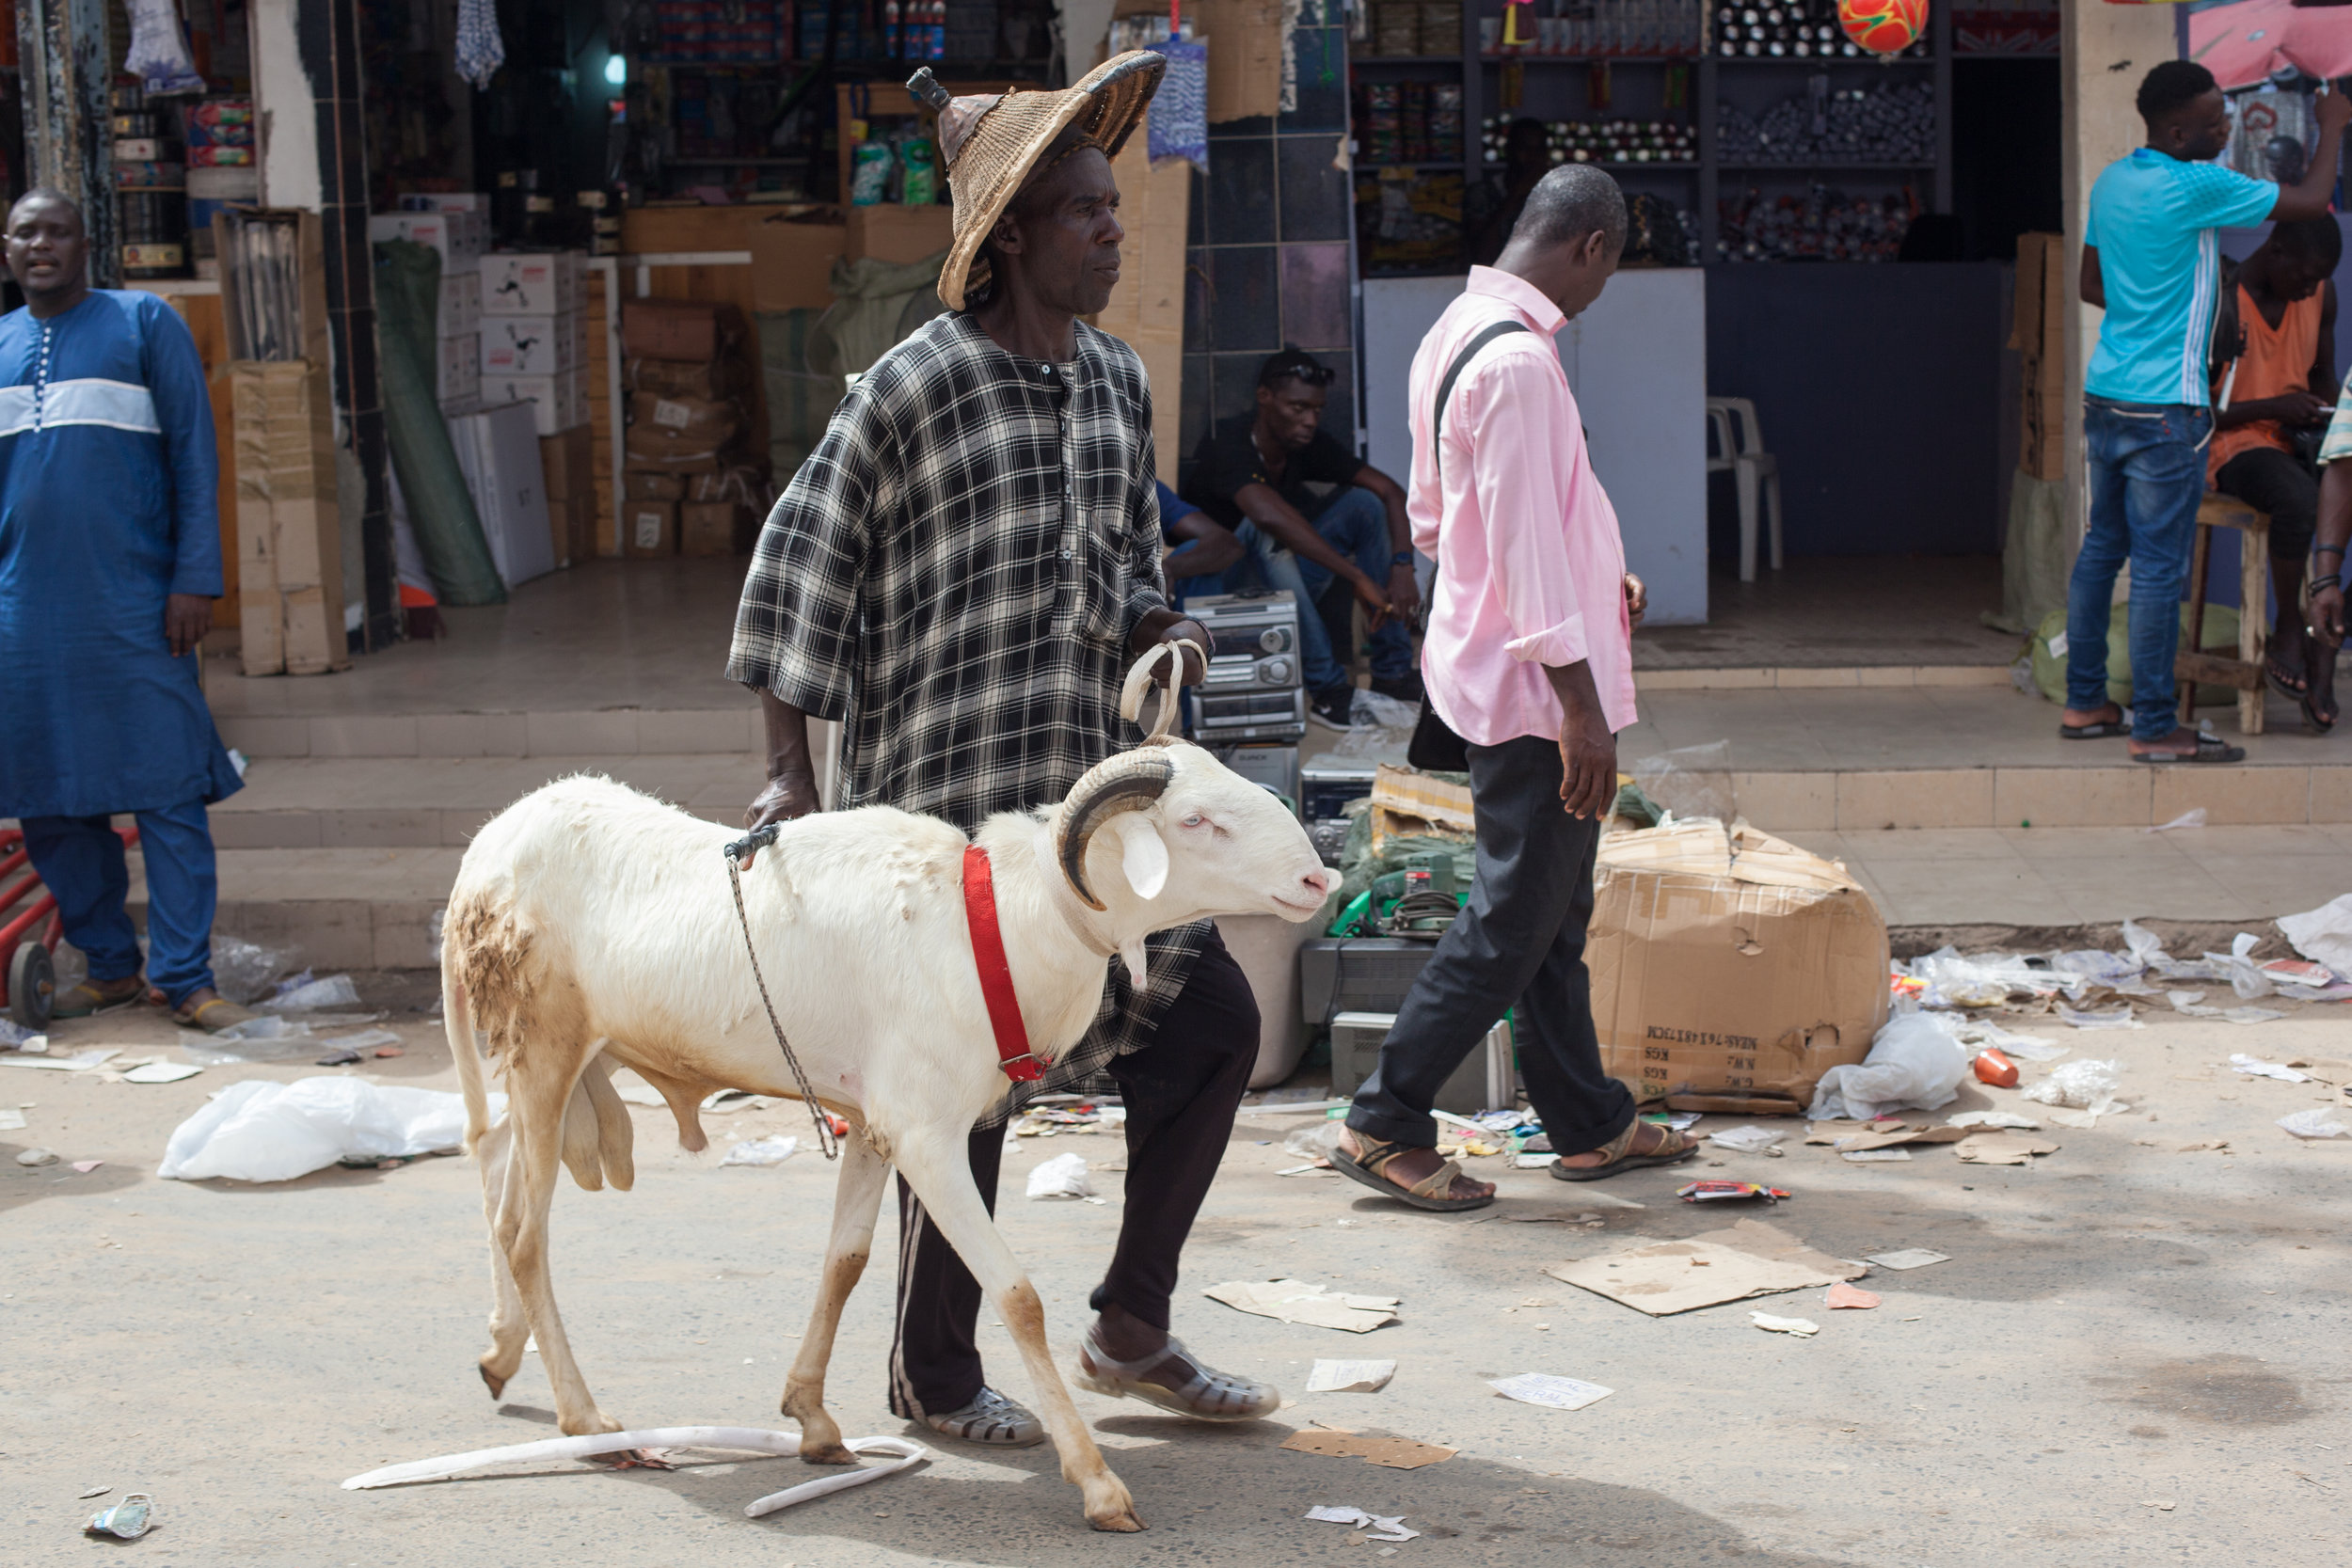 Street Photography in the Dakar, the capital of Senegal in West Africa.